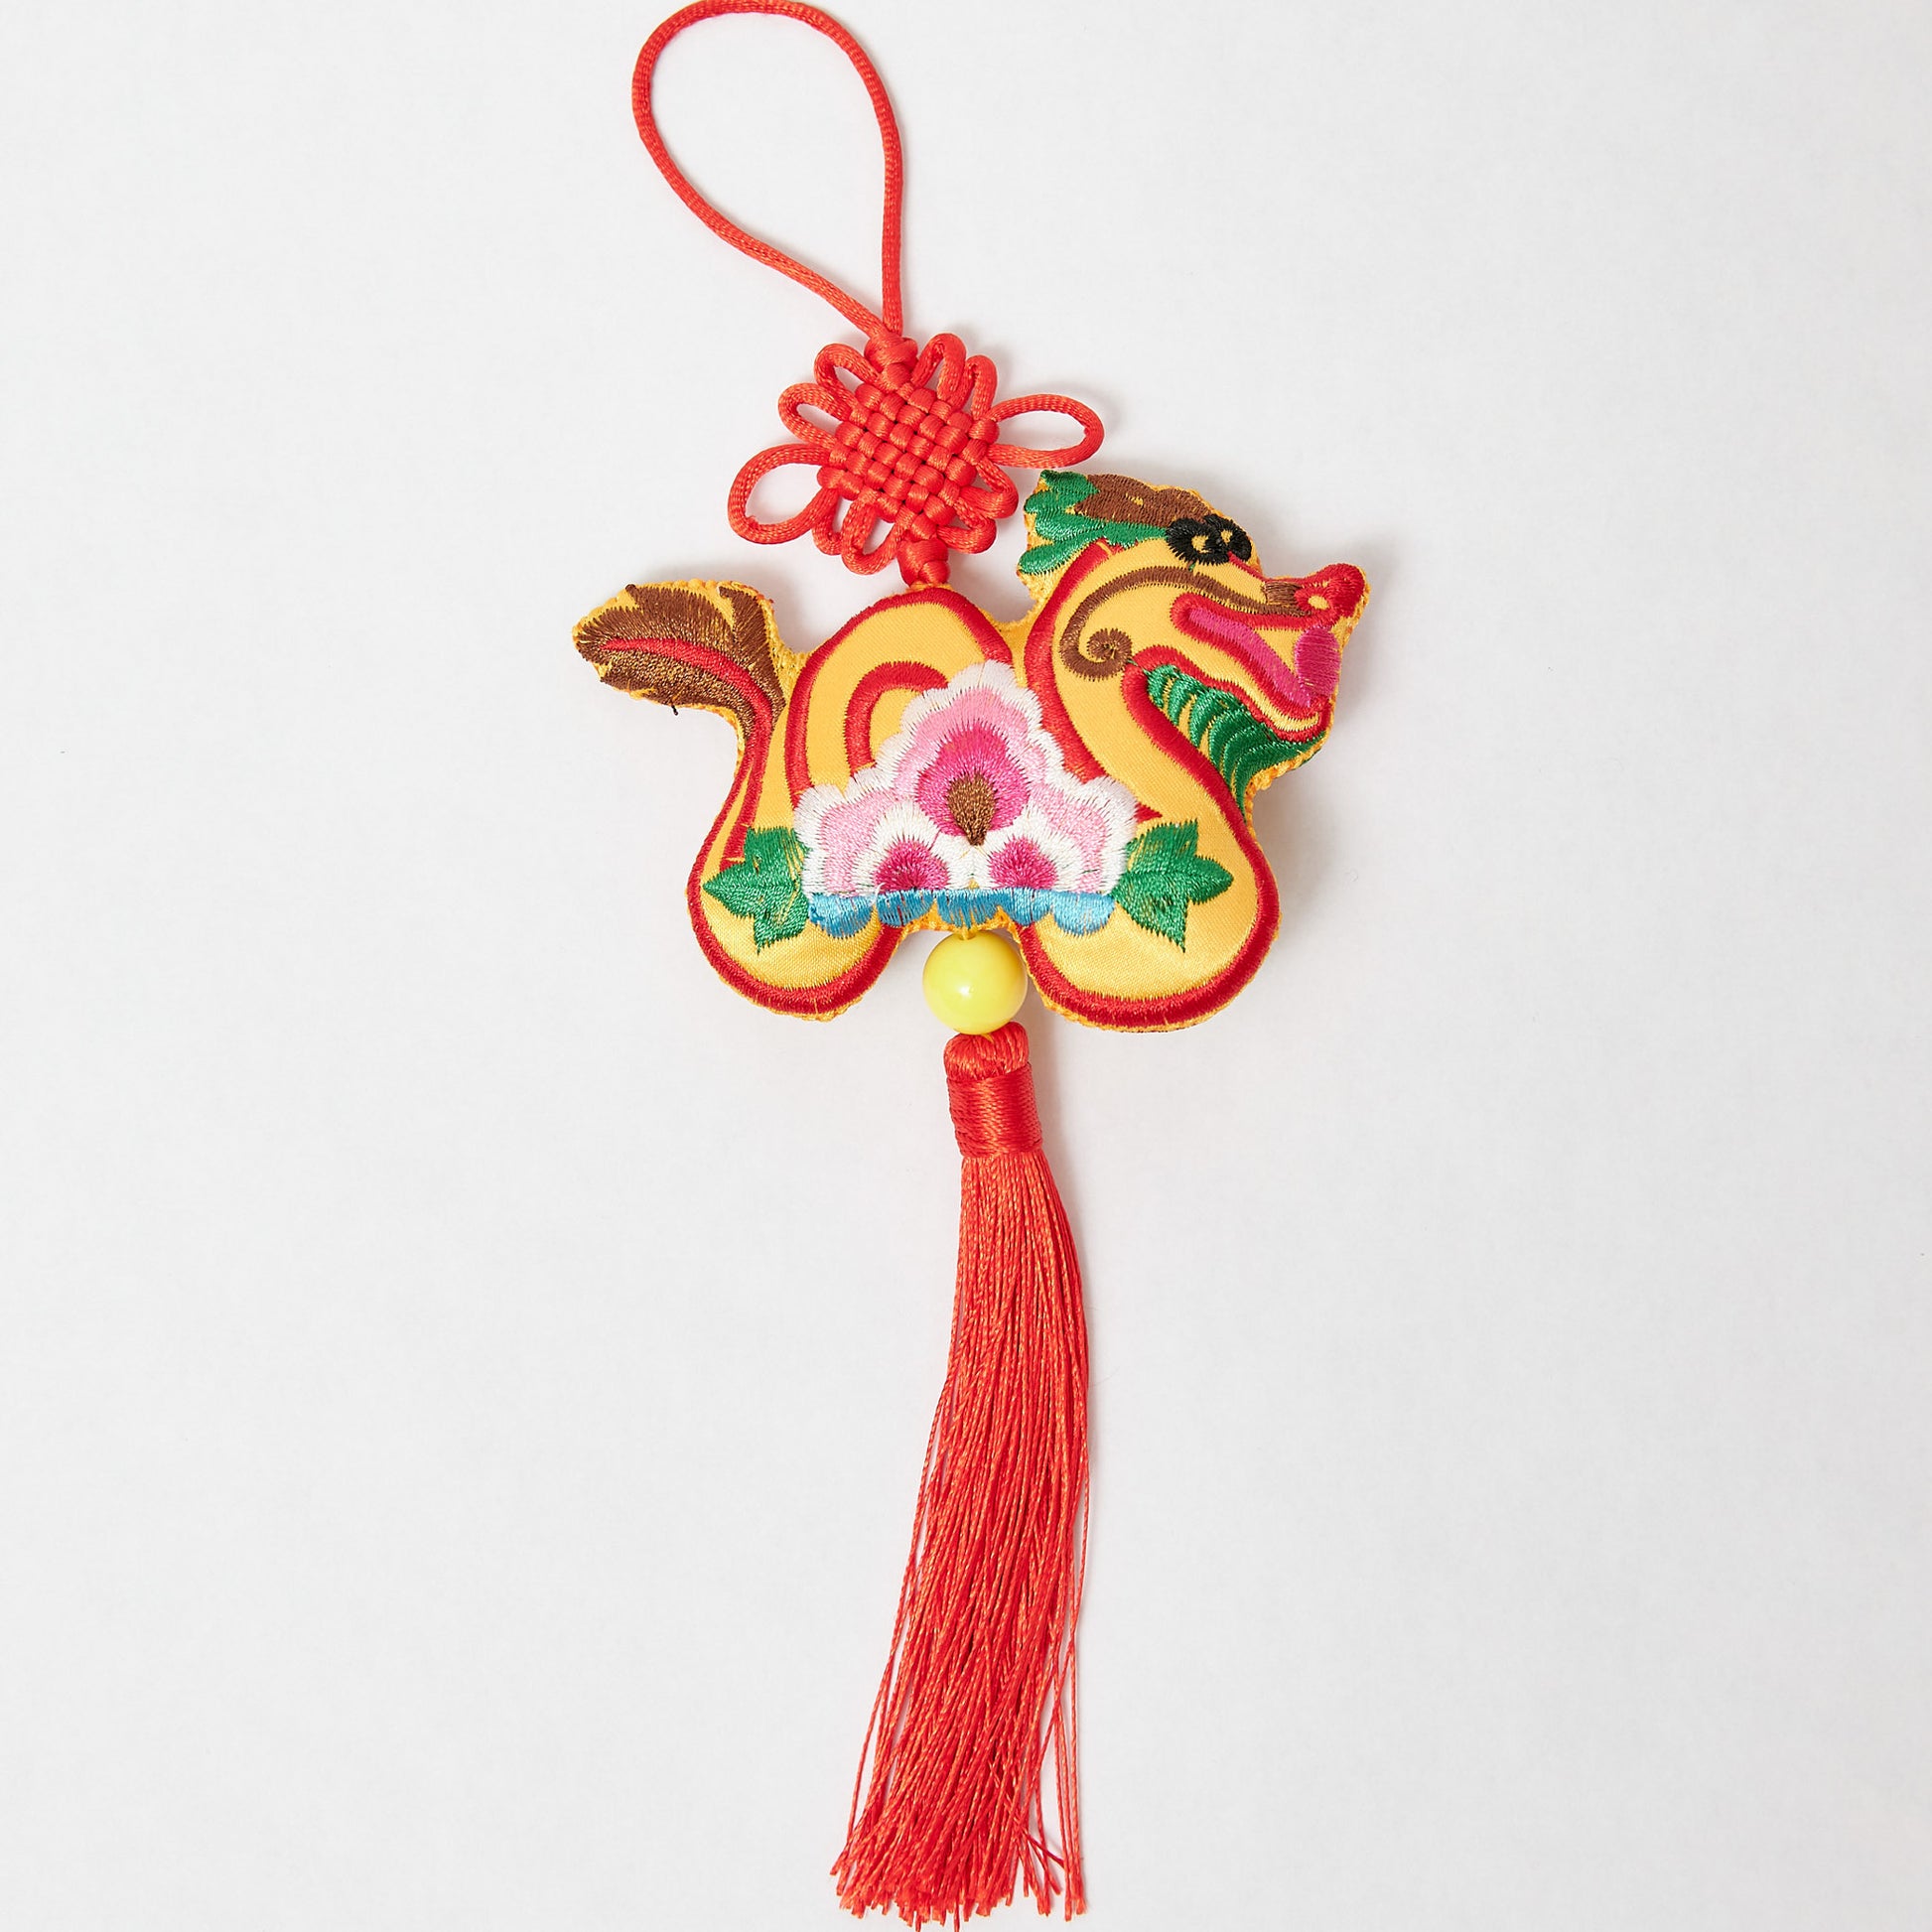 Lunar New Year gifts, candy, decorations